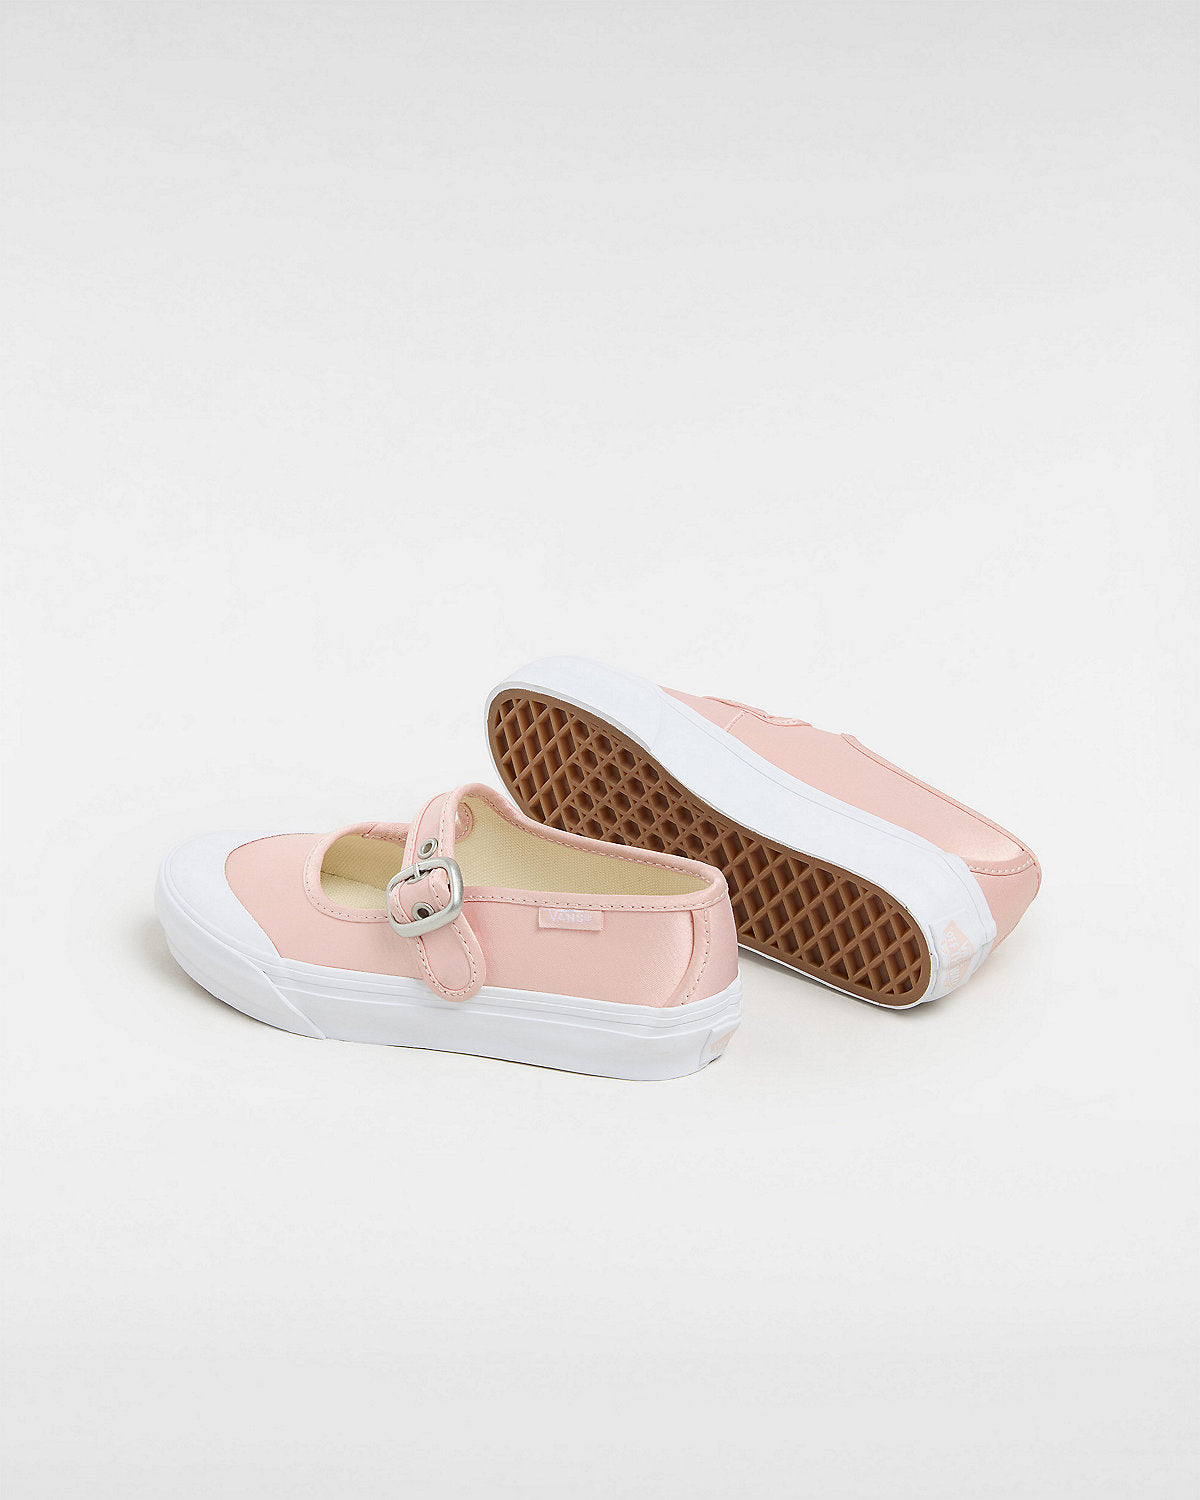 VANS Kids Mary Jane Trainers - Pink